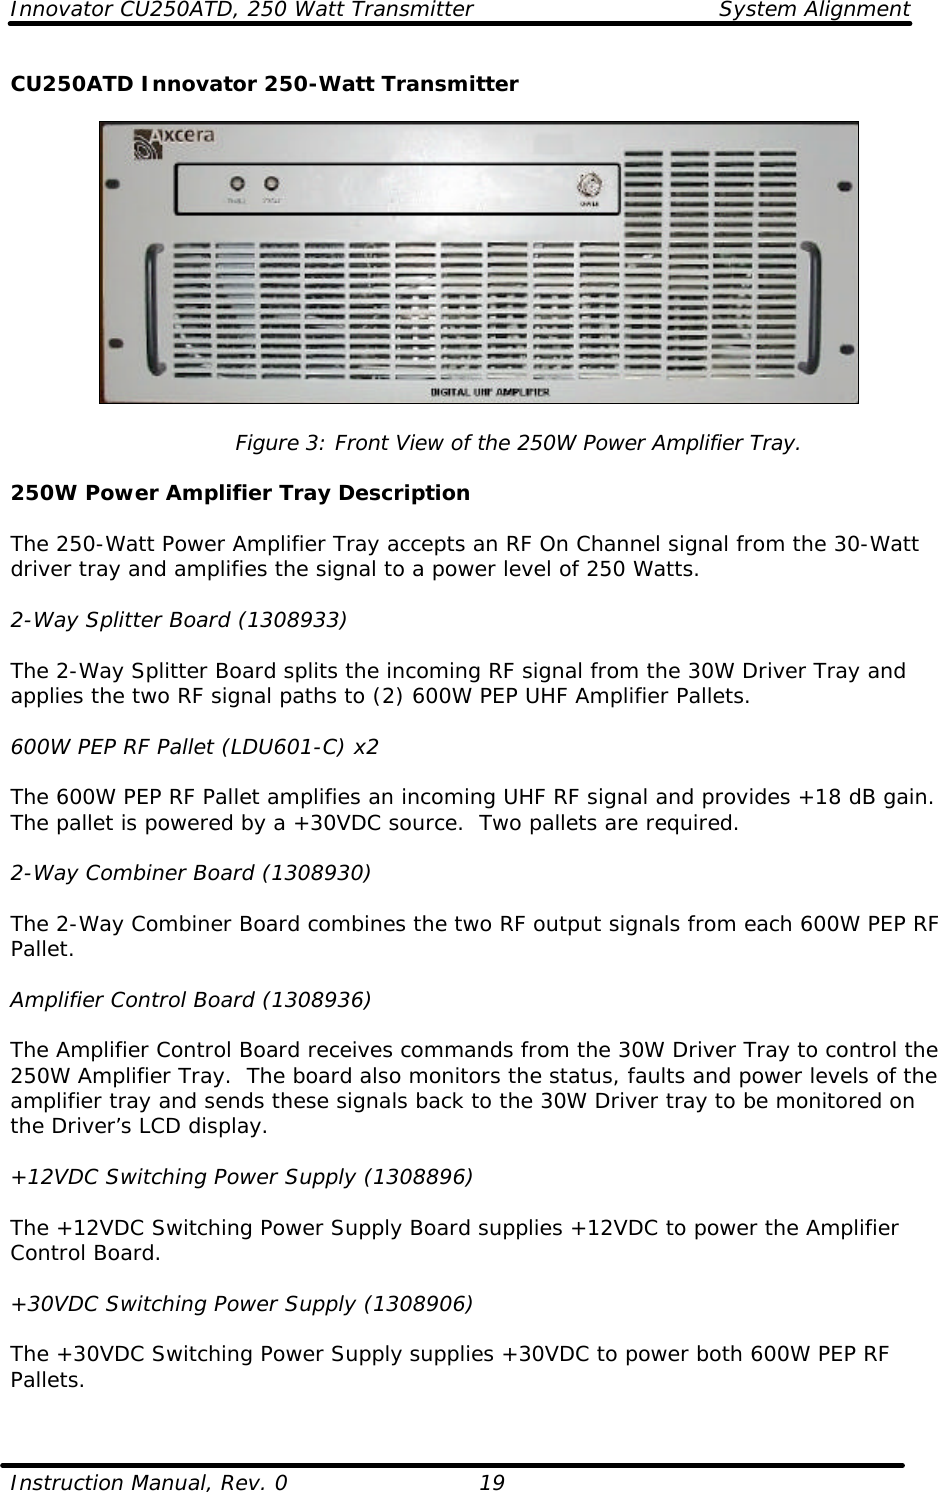 Innovator CU250ATD, 250 Watt Transmitter System Alignment  Instruction Manual, Rev. 0    19 CU250ATD Innovator 250-Watt Transmitter    Figure 3: Front View of the 250W Power Amplifier Tray.  250W Power Amplifier Tray Description  The 250-Watt Power Amplifier Tray accepts an RF On Channel signal from the 30-Watt driver tray and amplifies the signal to a power level of 250 Watts.   2-Way Splitter Board (1308933)  The 2-Way Splitter Board splits the incoming RF signal from the 30W Driver Tray and applies the two RF signal paths to (2) 600W PEP UHF Amplifier Pallets.   600W PEP RF Pallet (LDU601-C) x2  The 600W PEP RF Pallet amplifies an incoming UHF RF signal and provides +18 dB gain. The pallet is powered by a +30VDC source.  Two pallets are required.  2-Way Combiner Board (1308930)  The 2-Way Combiner Board combines the two RF output signals from each 600W PEP RF Pallet.  Amplifier Control Board (1308936)  The Amplifier Control Board receives commands from the 30W Driver Tray to control the 250W Amplifier Tray.  The board also monitors the status, faults and power levels of the amplifier tray and sends these signals back to the 30W Driver tray to be monitored on the Driver’s LCD display.  +12VDC Switching Power Supply (1308896)  The +12VDC Switching Power Supply Board supplies +12VDC to power the Amplifier Control Board.  +30VDC Switching Power Supply (1308906)  The +30VDC Switching Power Supply supplies +30VDC to power both 600W PEP RF Pallets.  